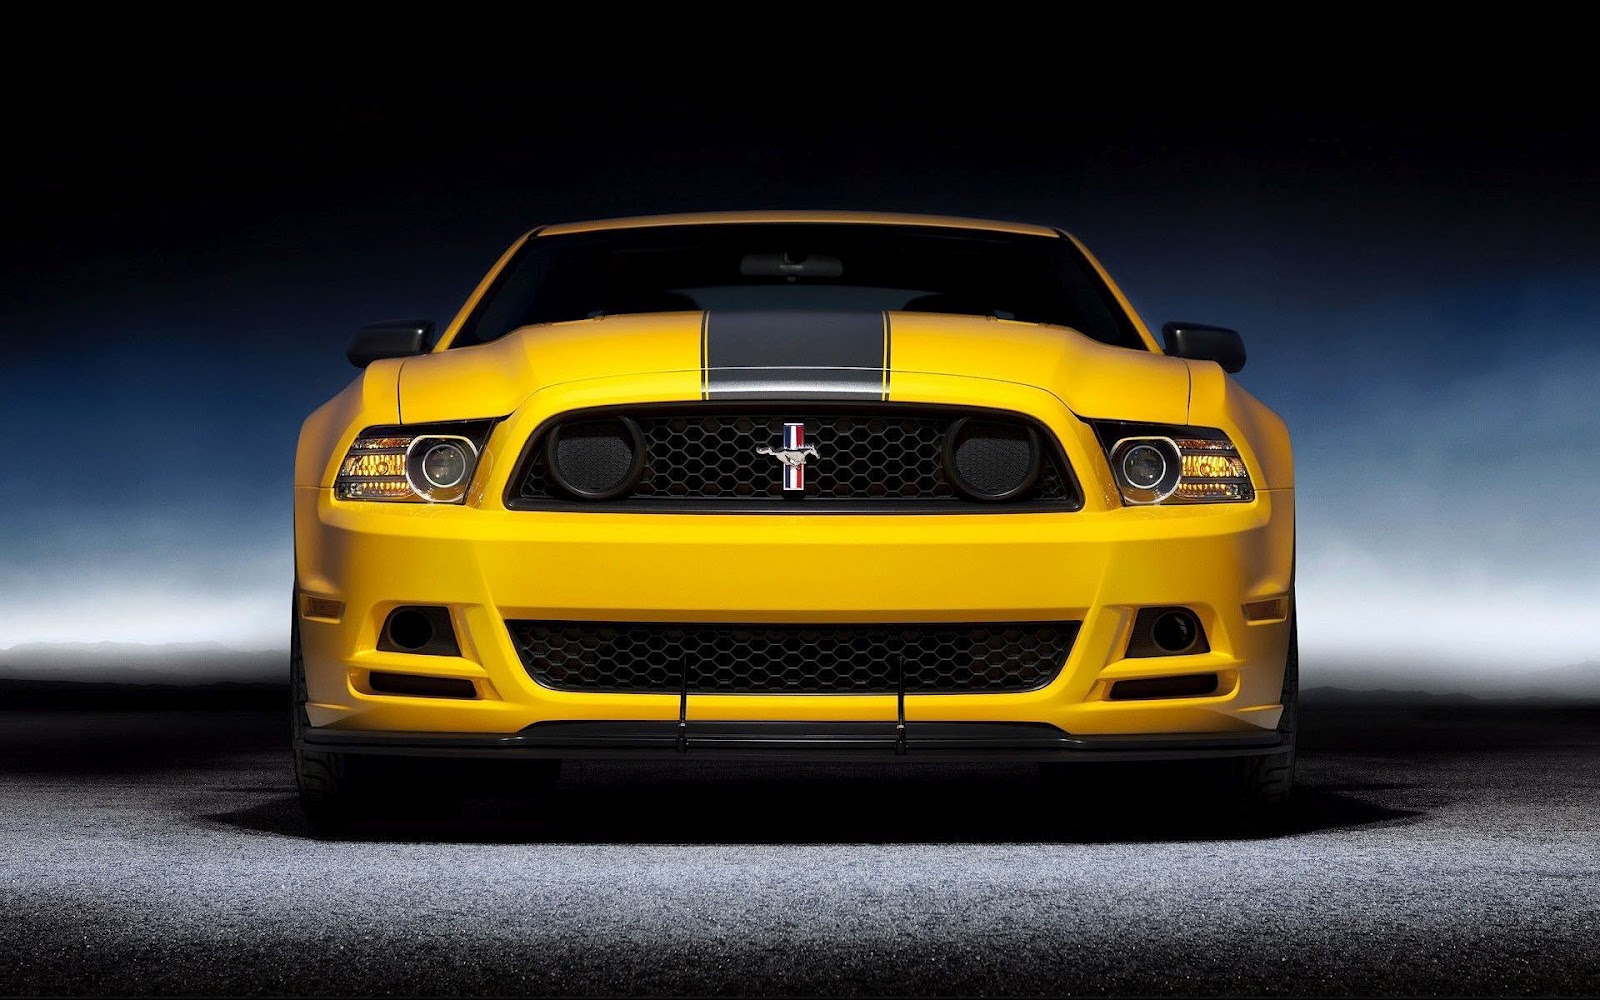 99 WALLPAPERS: 2012 Ford mustang-BOSS 302 CAR WALLPAPERS